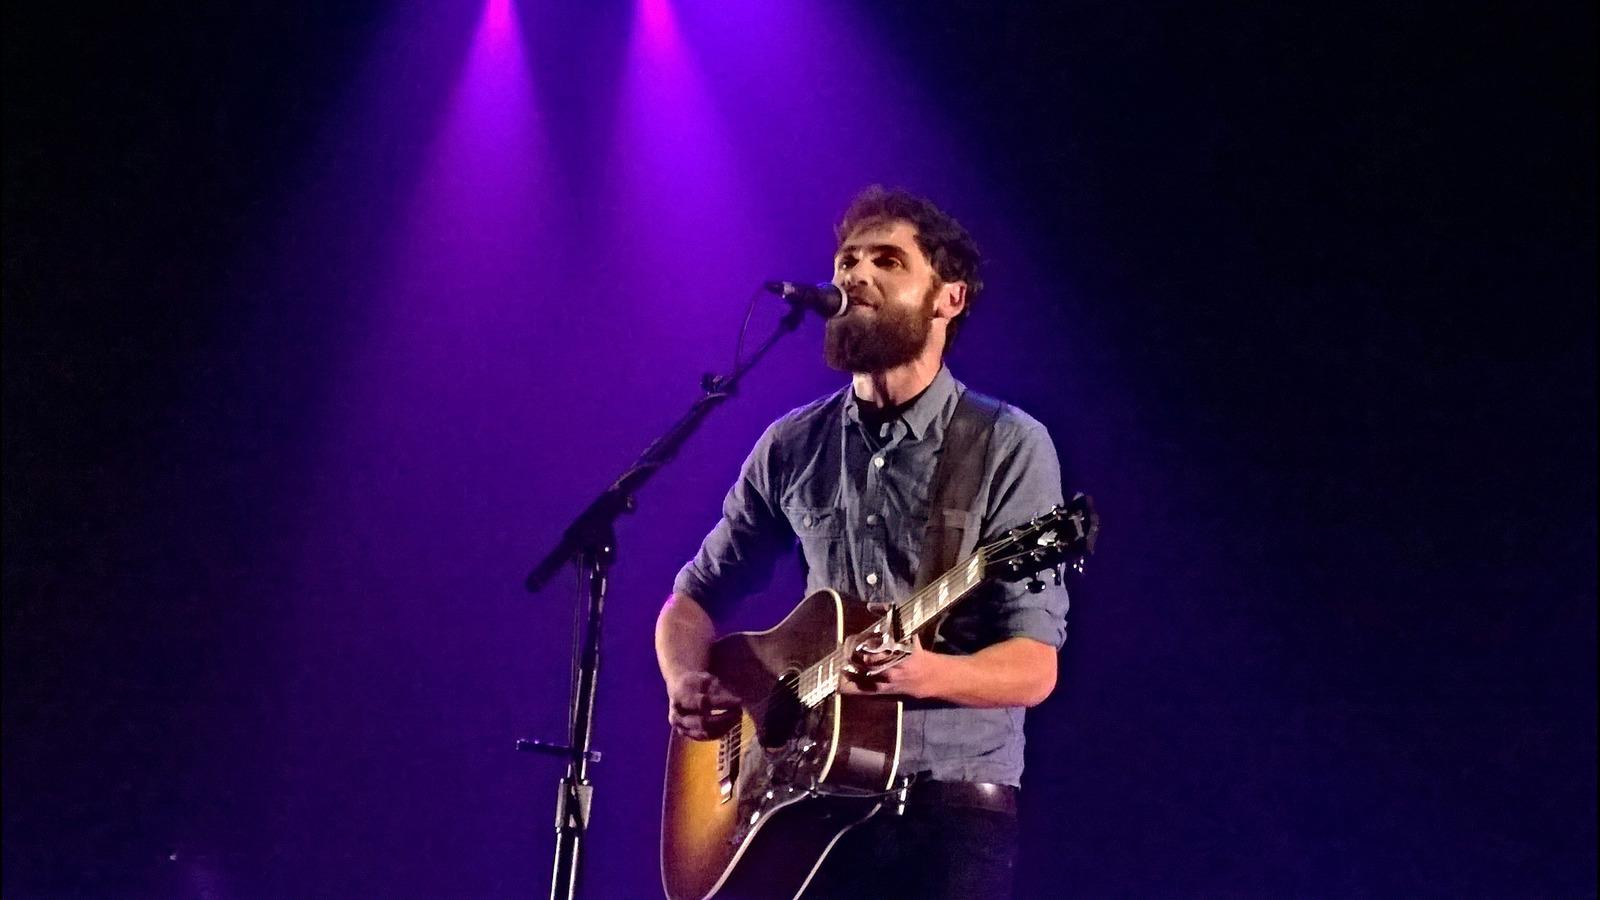 On This Day In Music: We Are Wishing Passenger A Happy Birthday